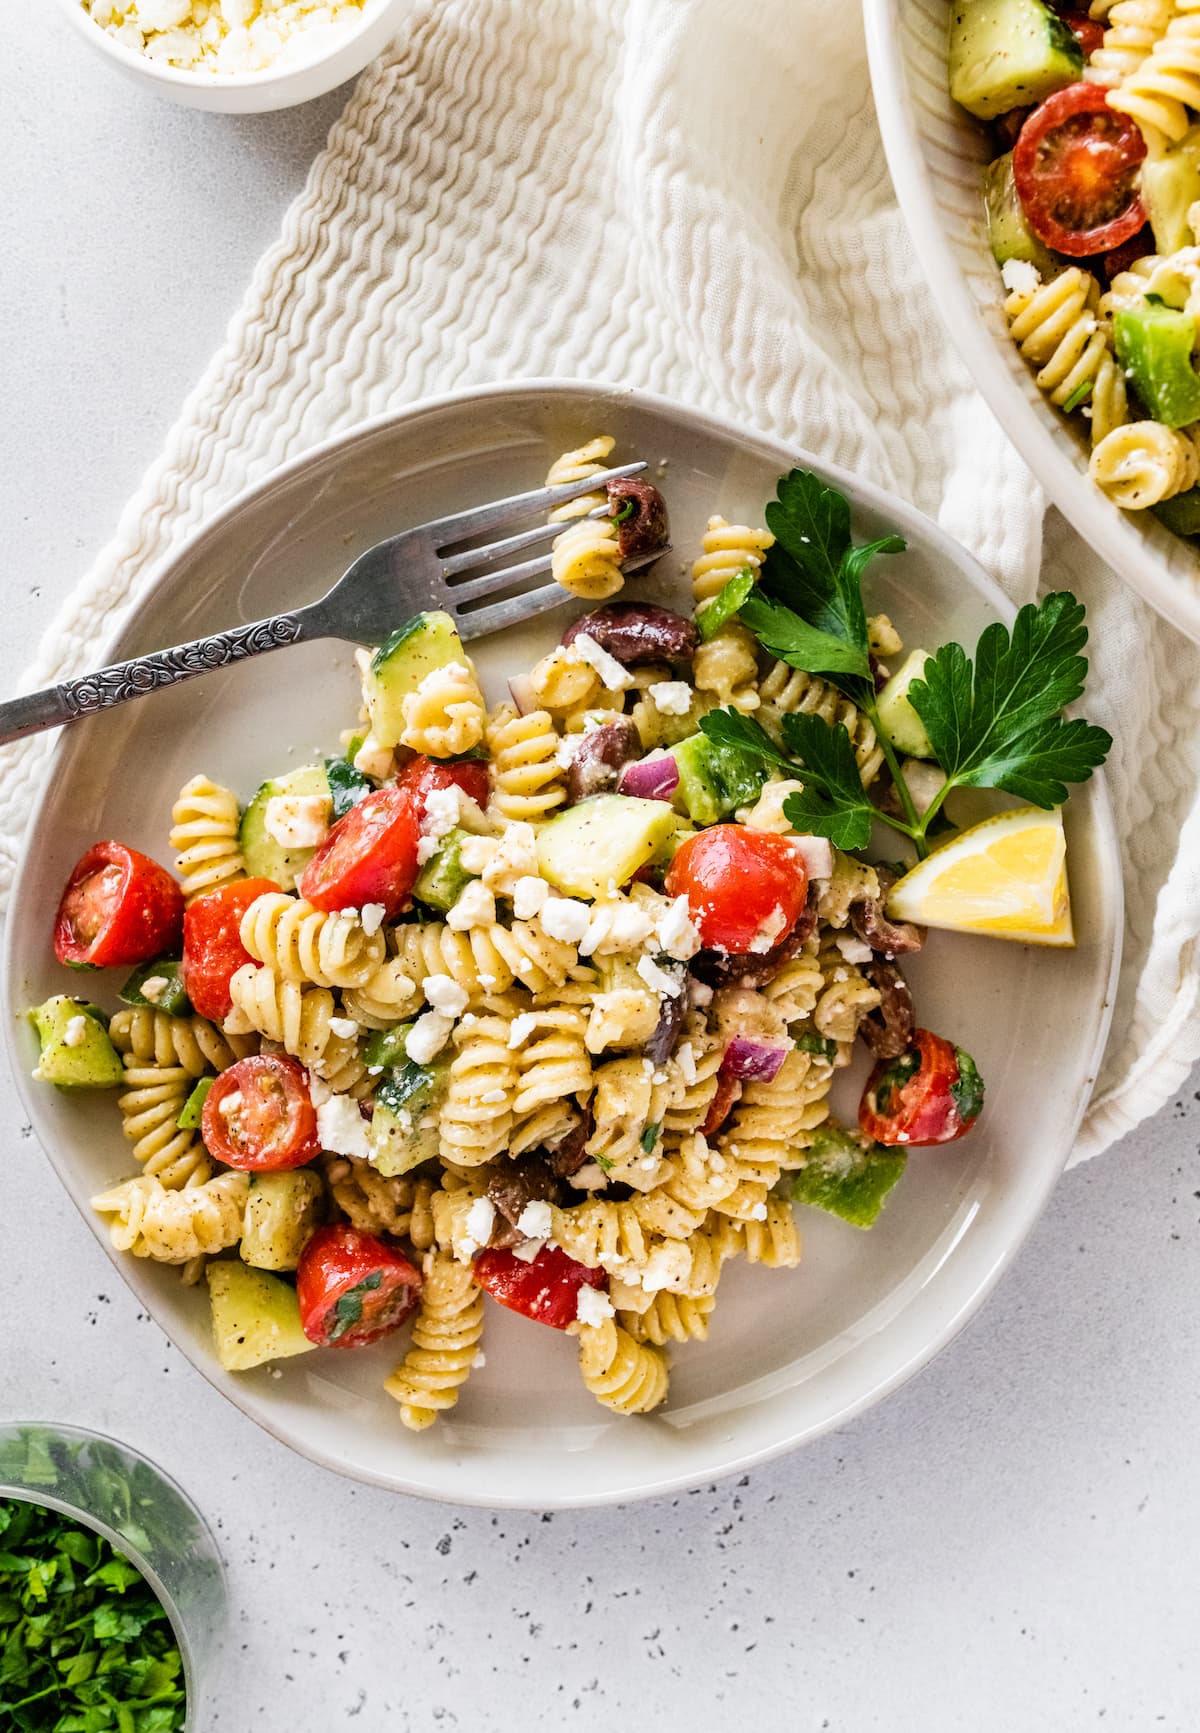 A serving of greek pasta salad on a plate with a metal fork.